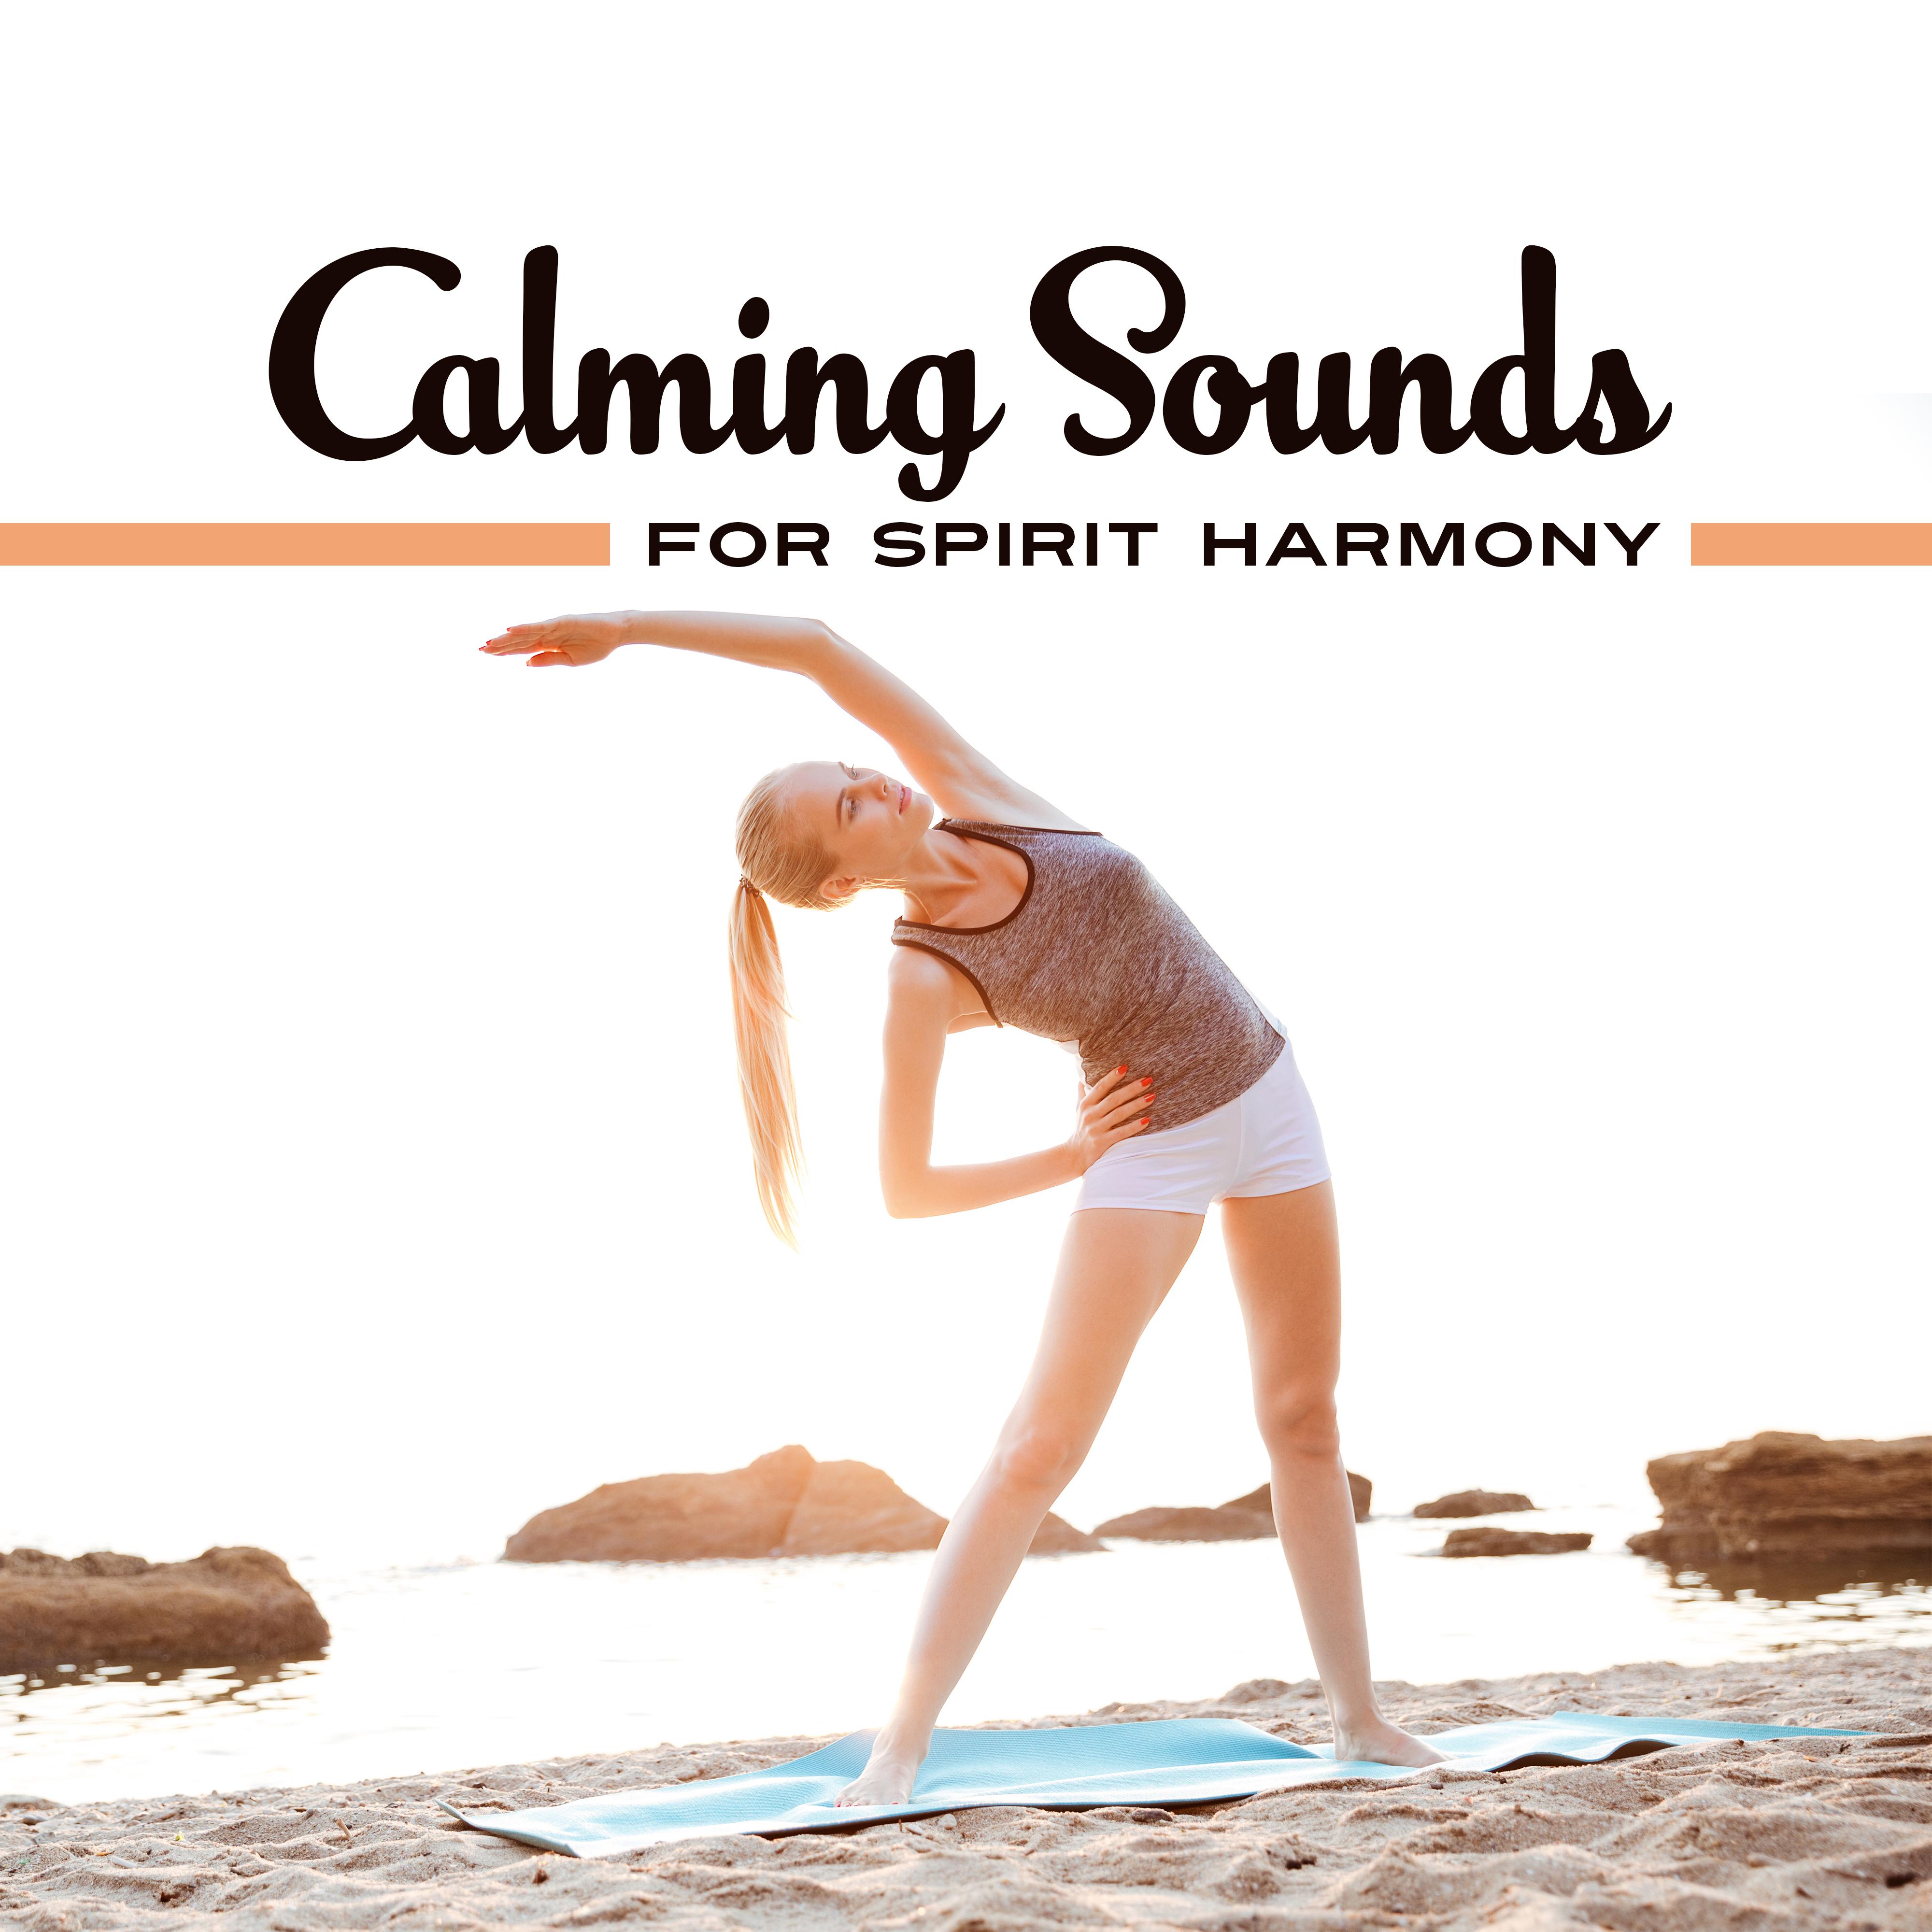 Calming Sounds for Spirit Harmony  Easy Listening, Stress Relief, Meditation Sounds, Peaceful Spirit Journey